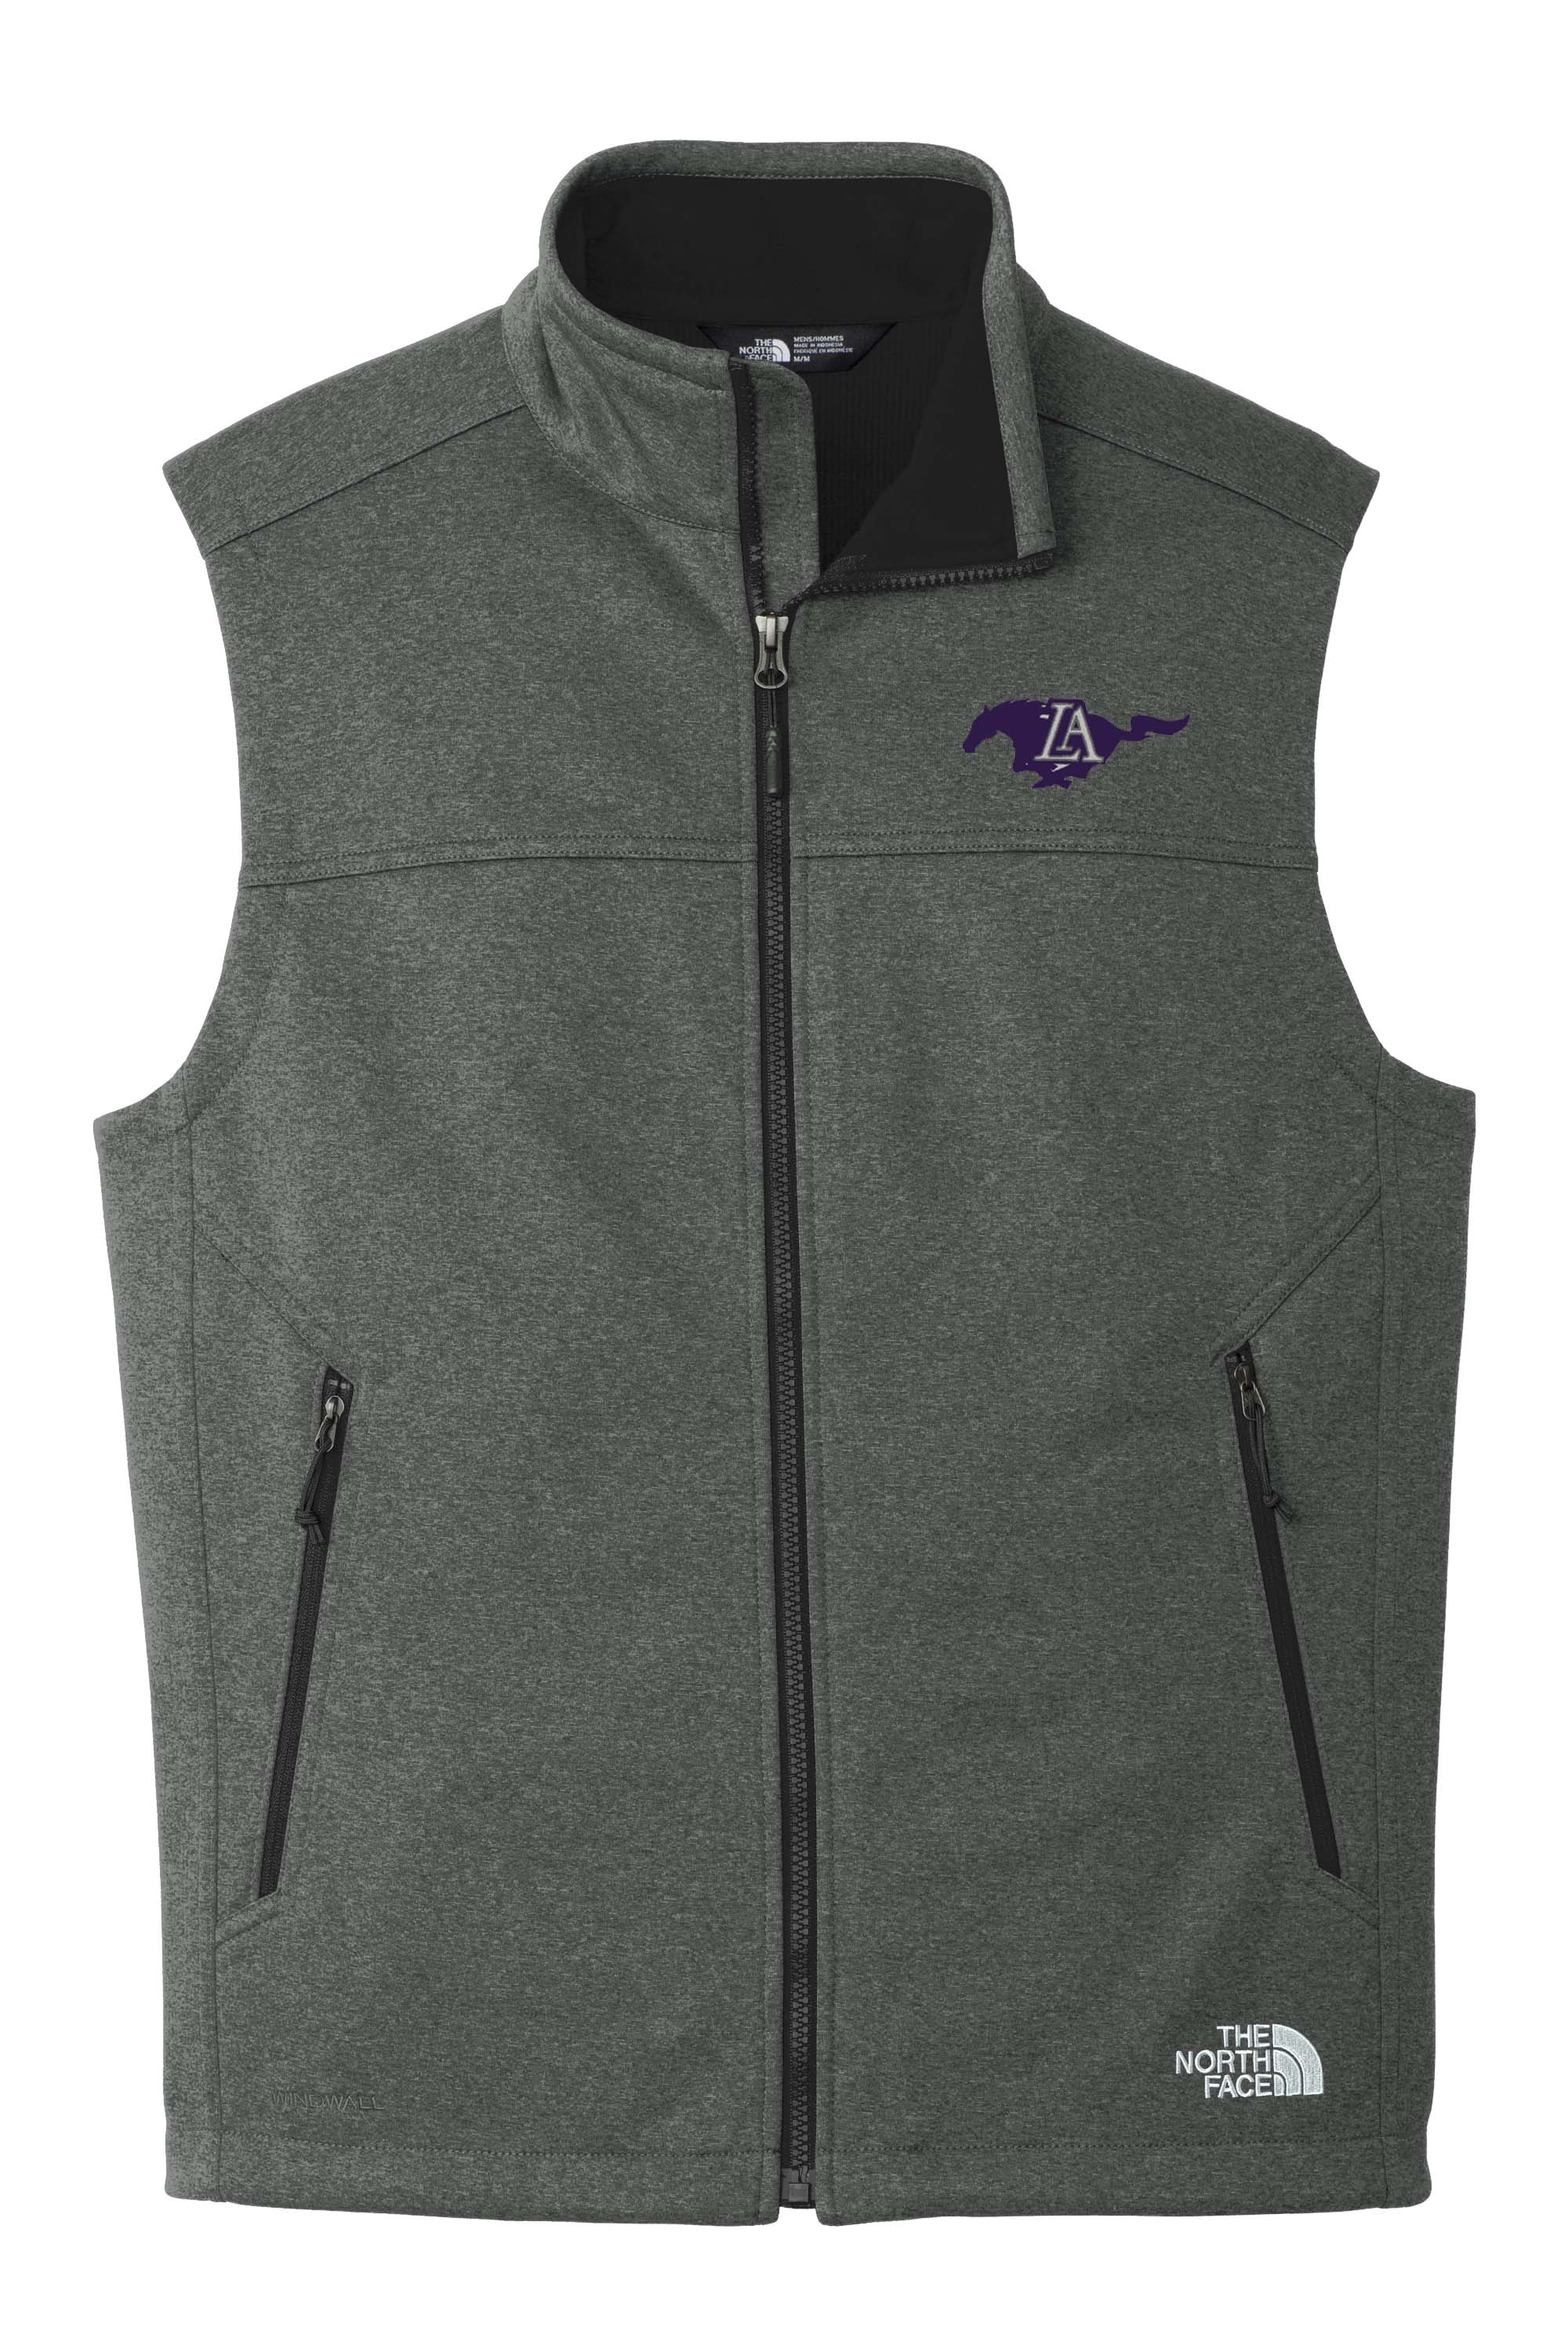 The North Face Soft Shell Vest